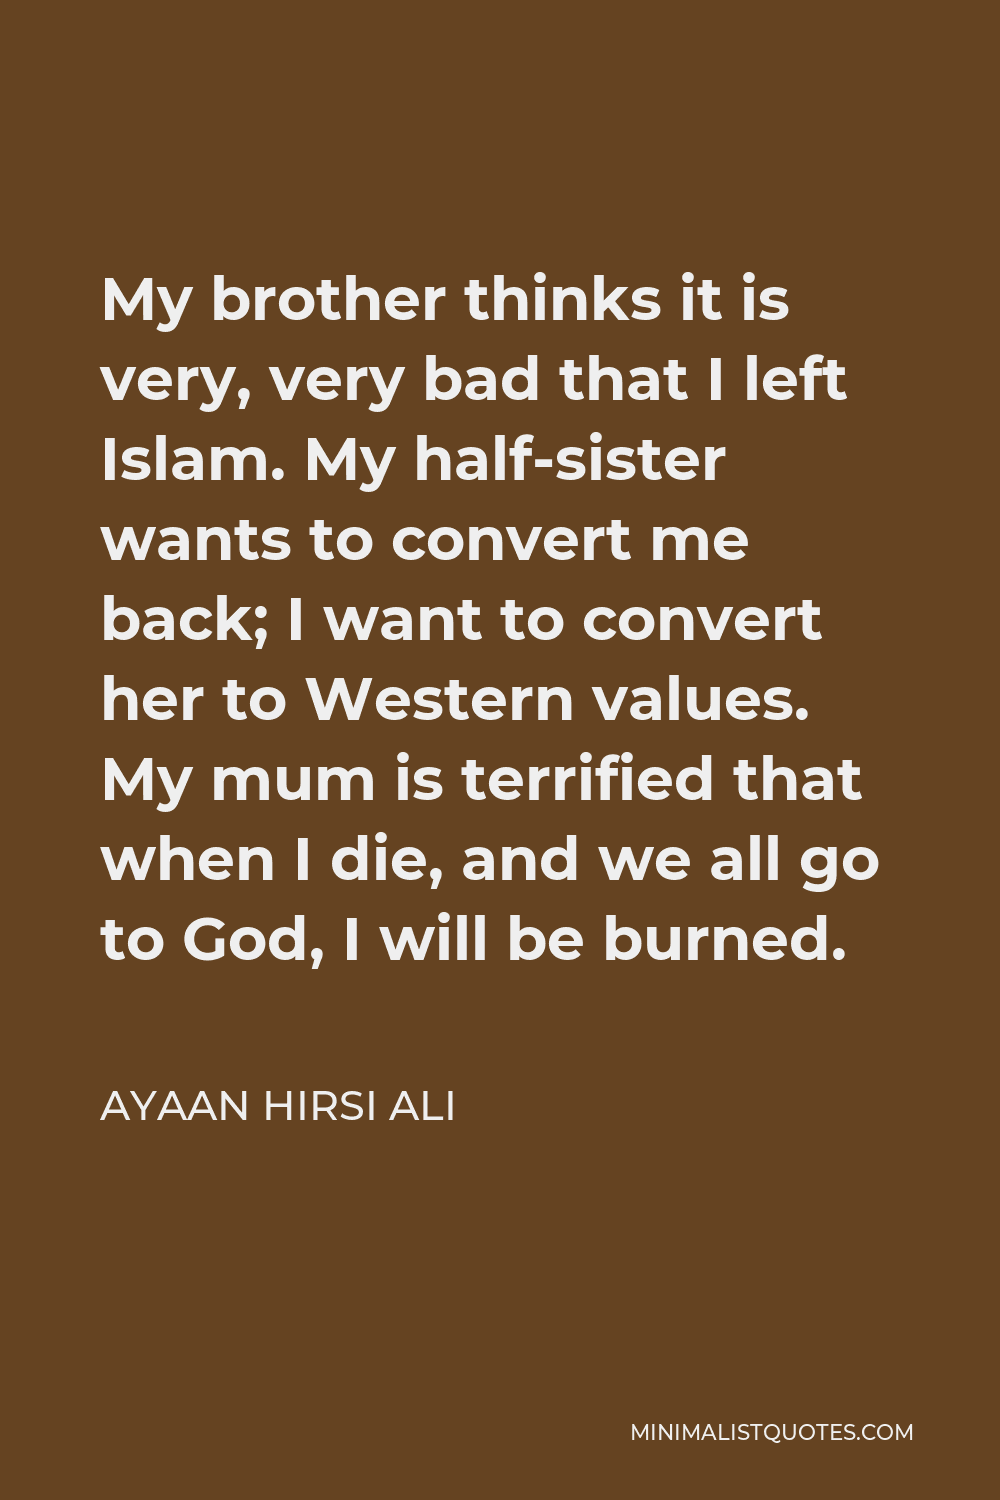 Ayaan Hirsi Ali Quote - My brother thinks it is very, very bad that I left Islam. My half-sister wants to convert me back; I want to convert her to Western values. My mum is terrified that when I die, and we all go to God, I will be burned.